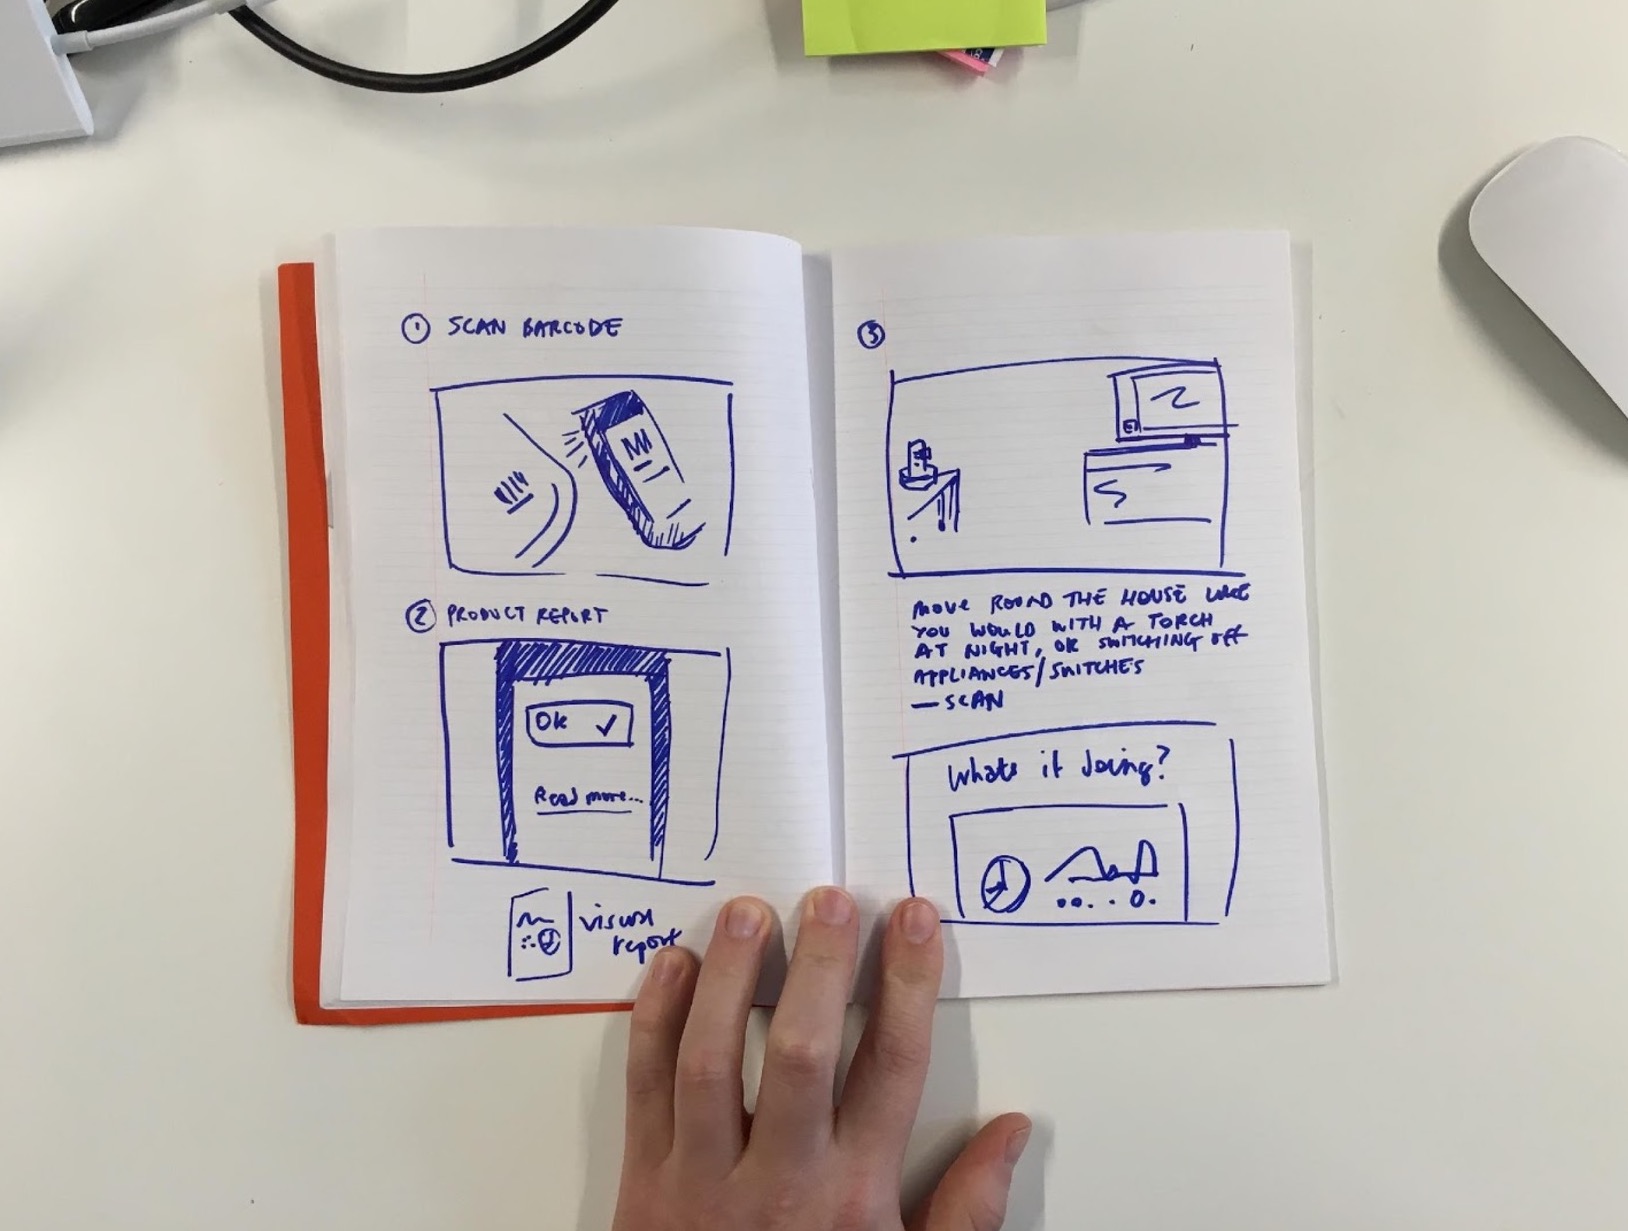 Open notebook showing storyboard sketches